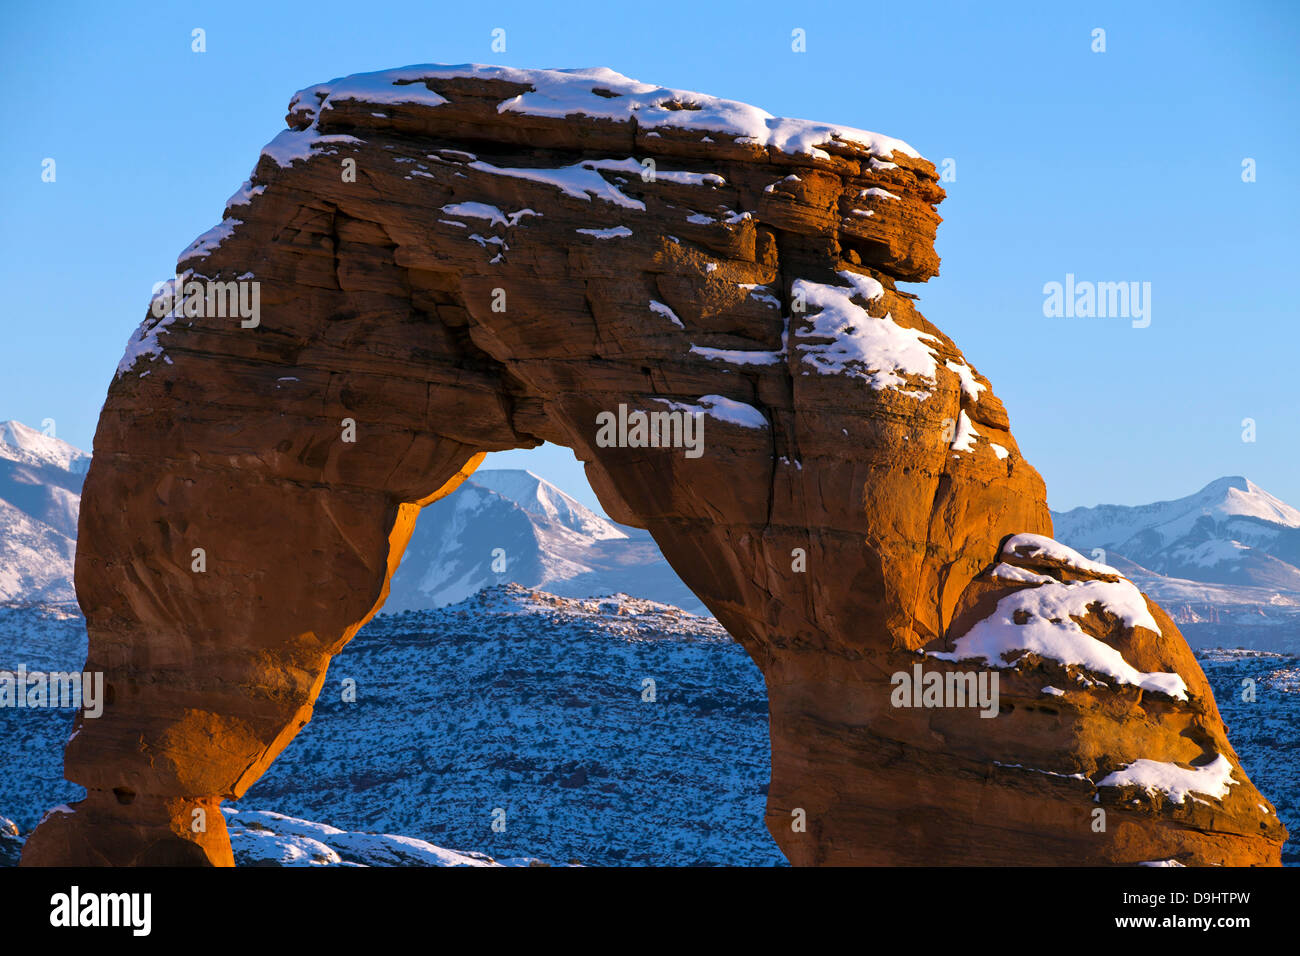 Detailed view of Delicate Arch with snow in winter at sunset, Arches National Park, Utah, United States of America Stock Photo